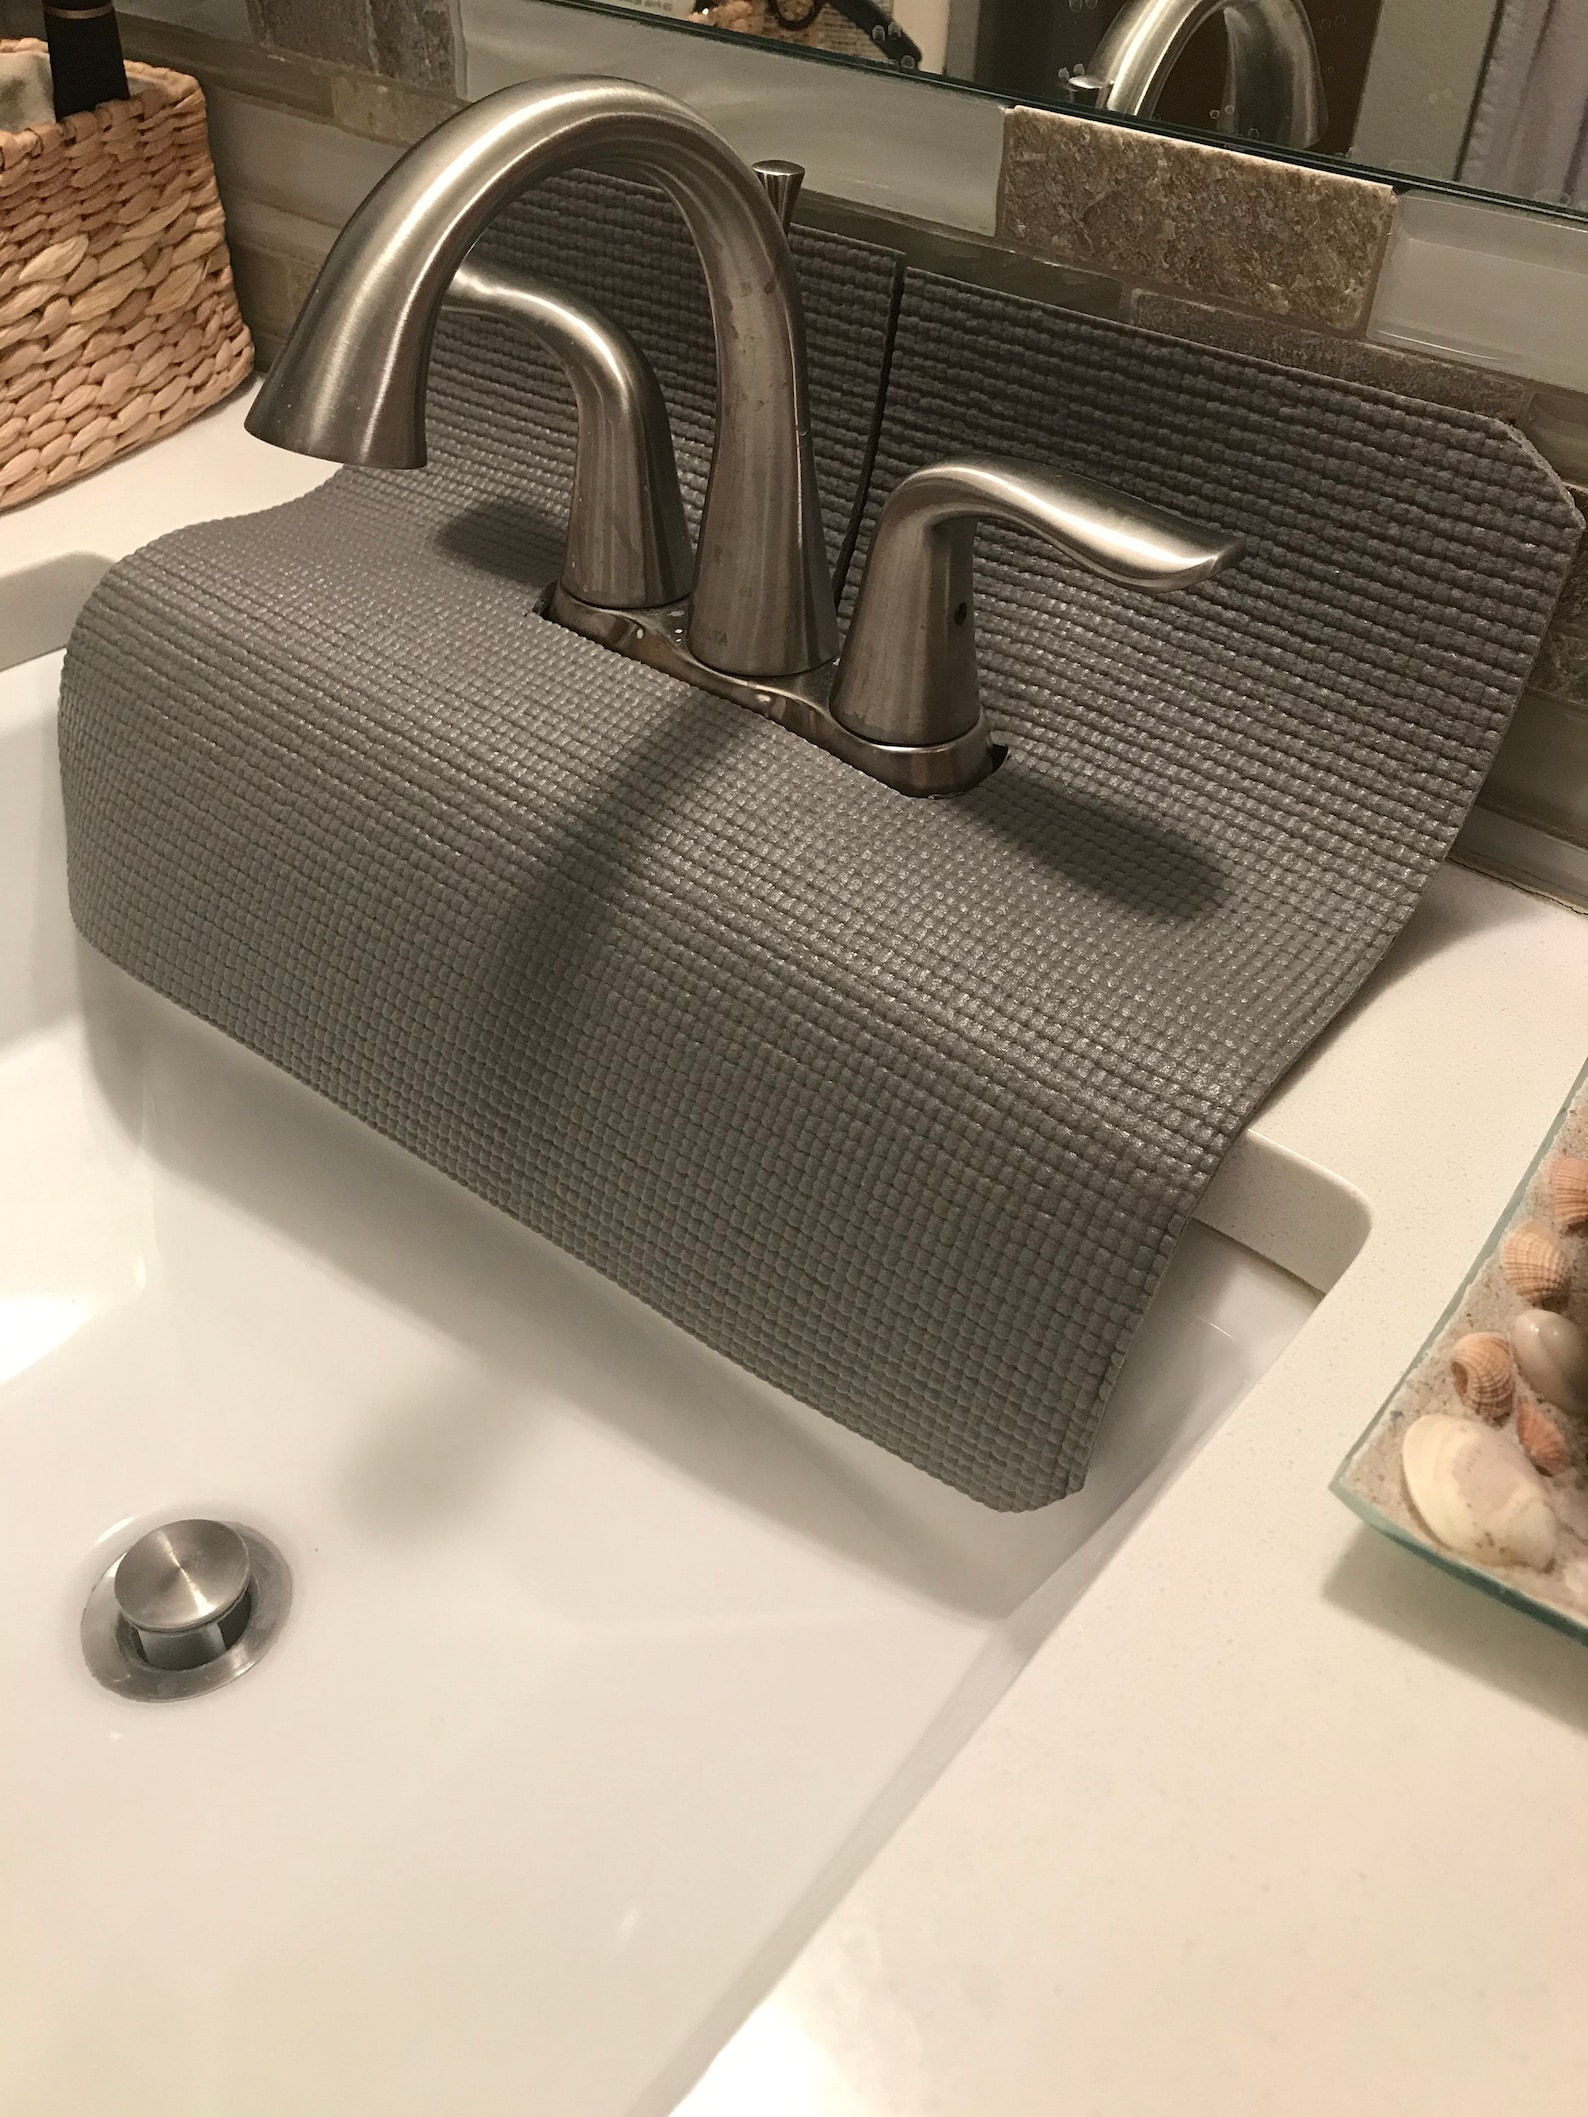 Gray Bathroom Faucet Splash Guard Guards From Water Etsy